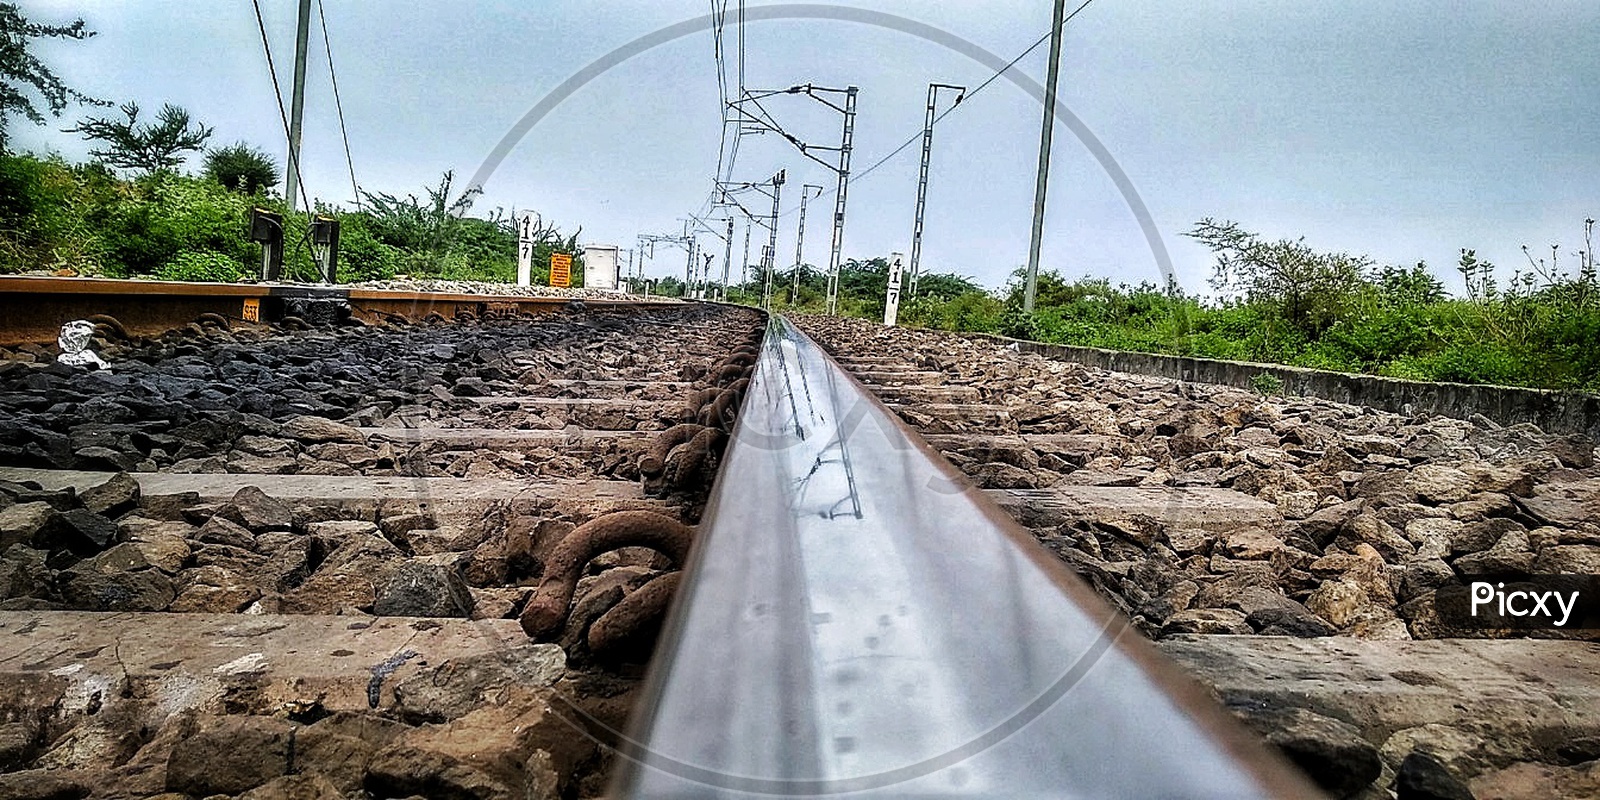 Reflection on the railway track